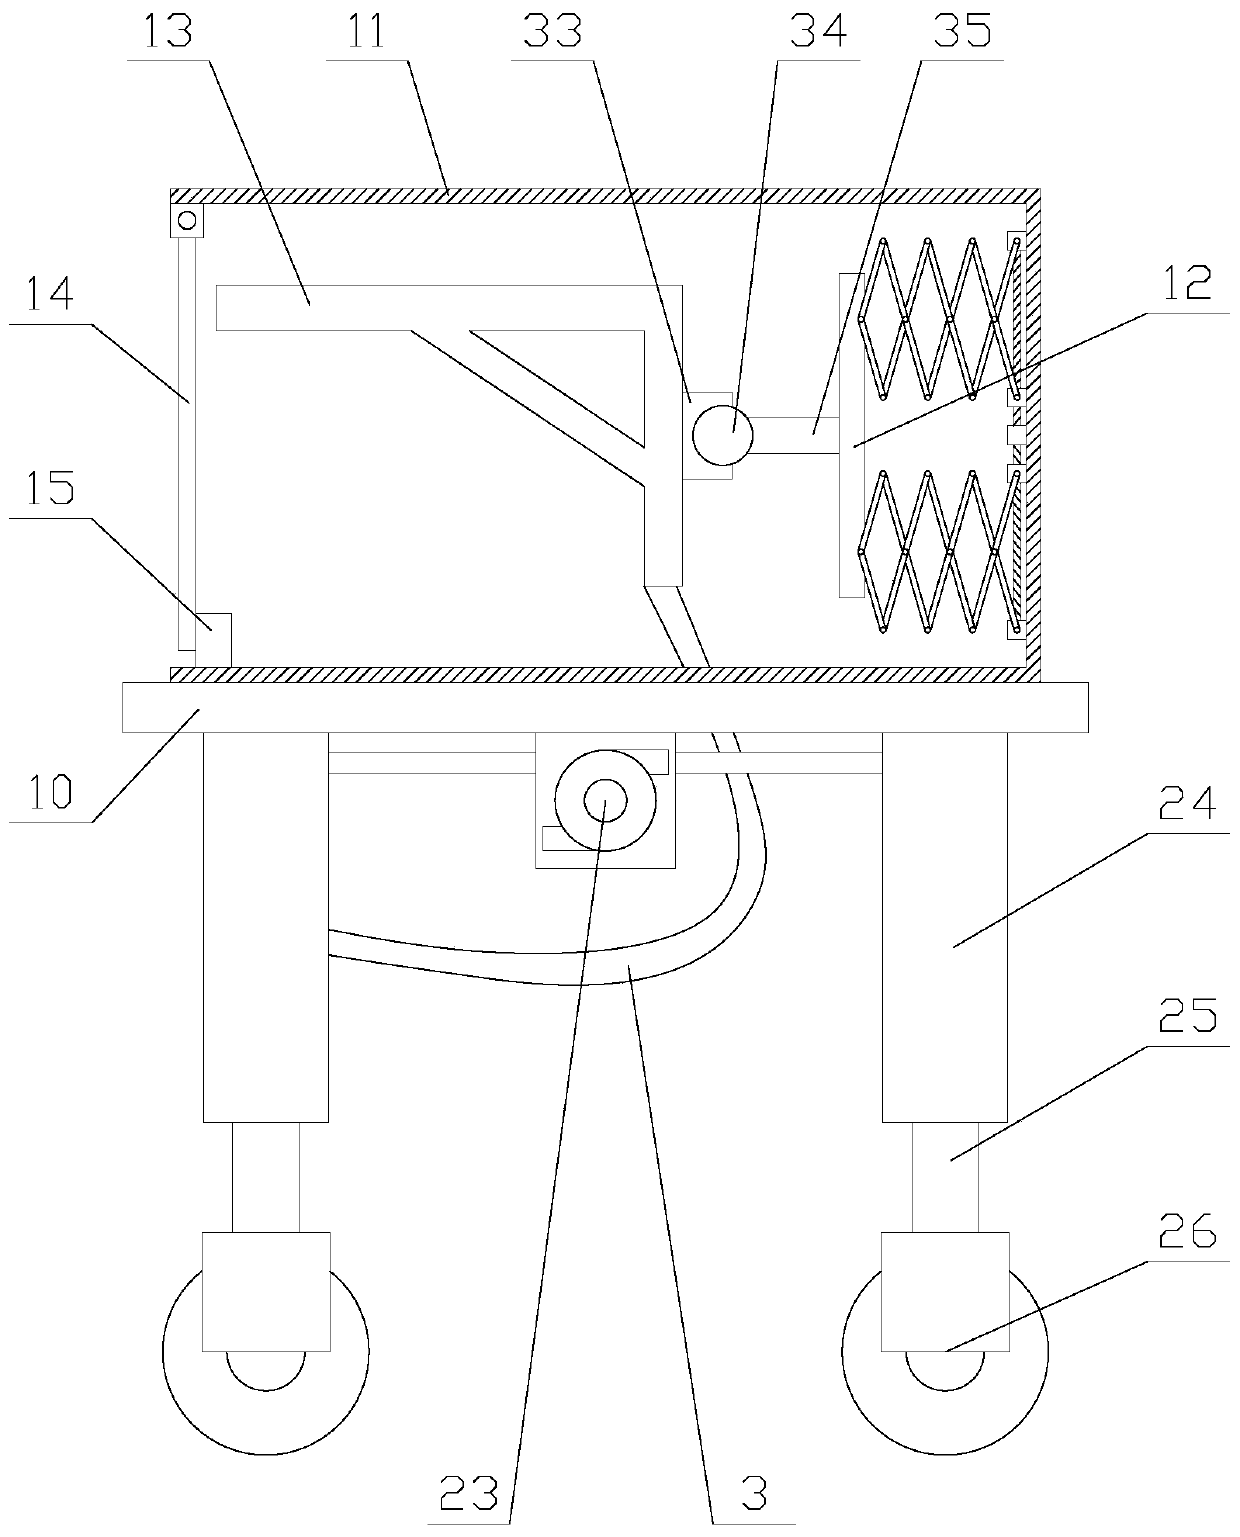 Safe and reliable electric vehicle charging device